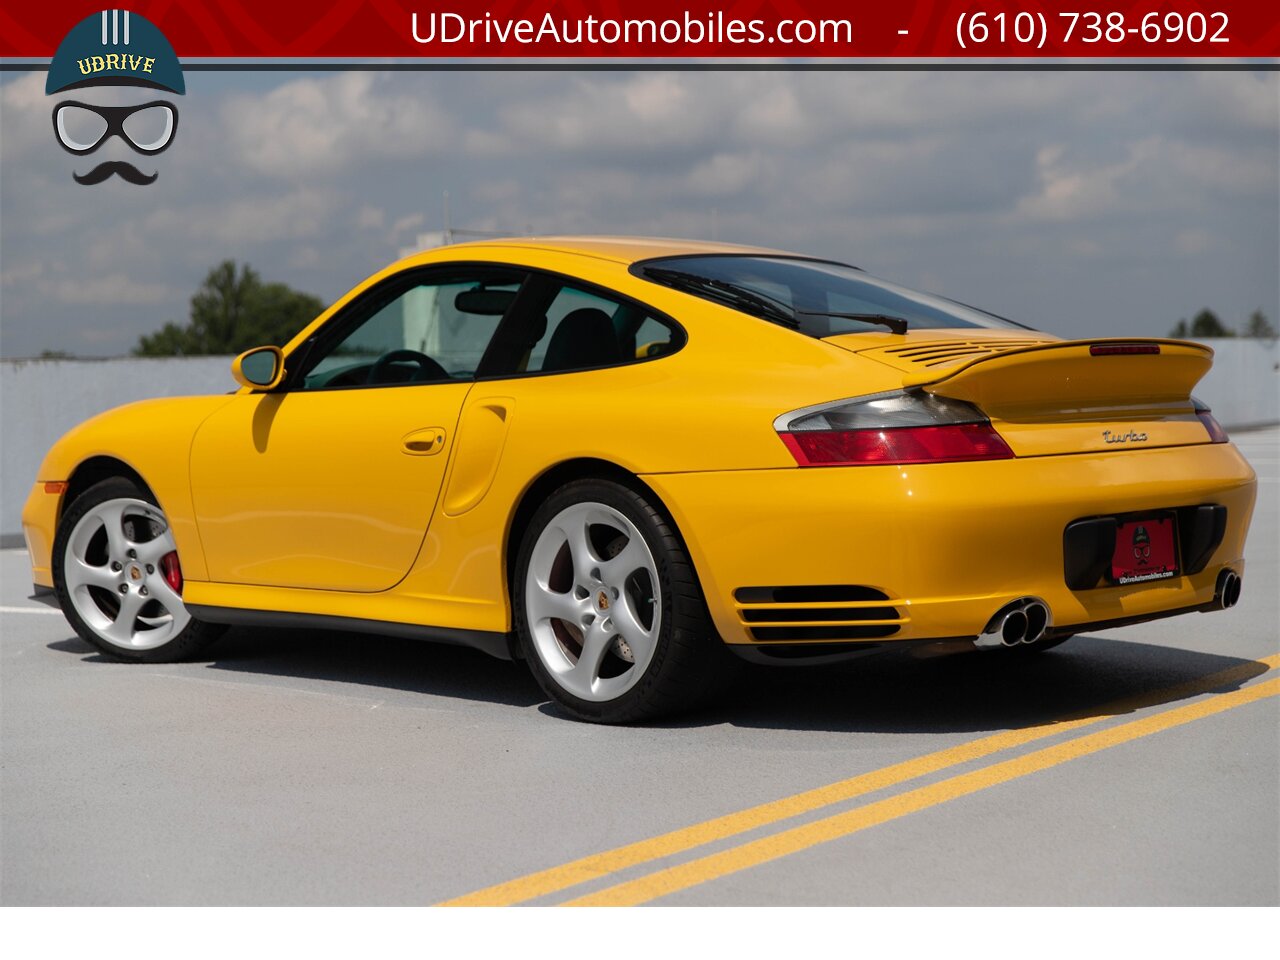 2003 Porsche 911 996 Turbo X50 6Sp Nephrite Green Lthr 9k Miles  Deviating Yellow Stitching Collector Grade BACK AGAIN - Photo 5 - West Chester, PA 19382